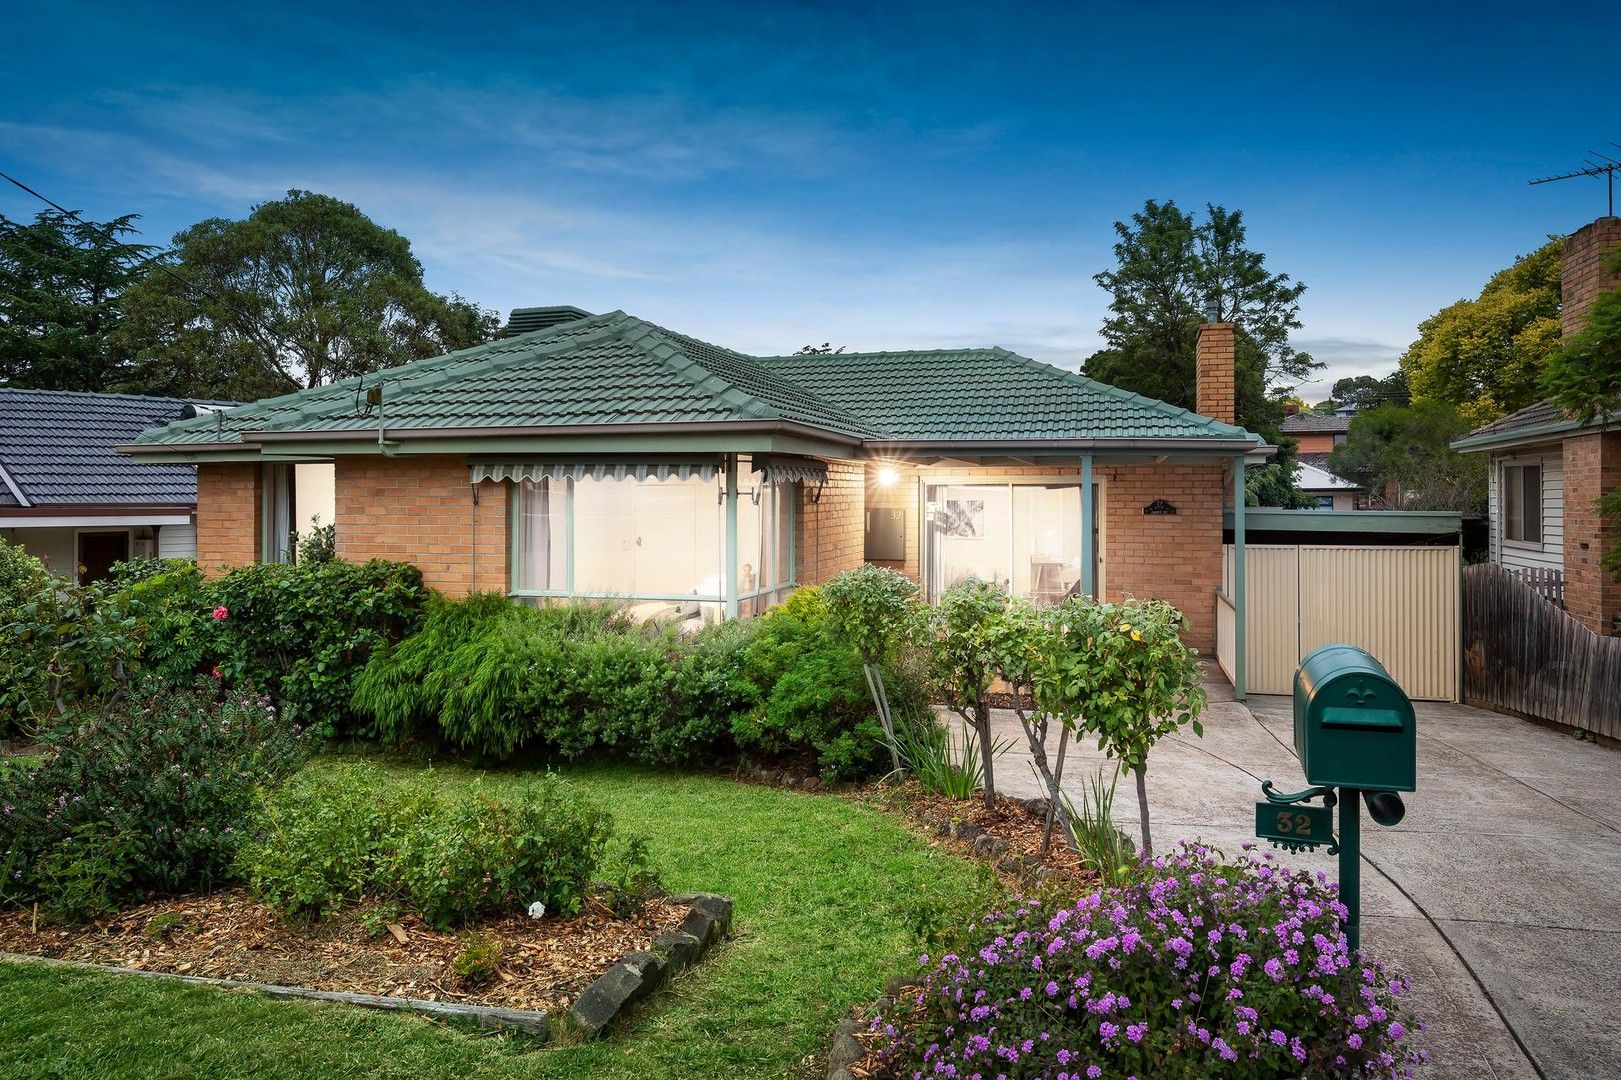 4 bedrooms House in 32 Amiet Street GREENSBOROUGH VIC, 3088